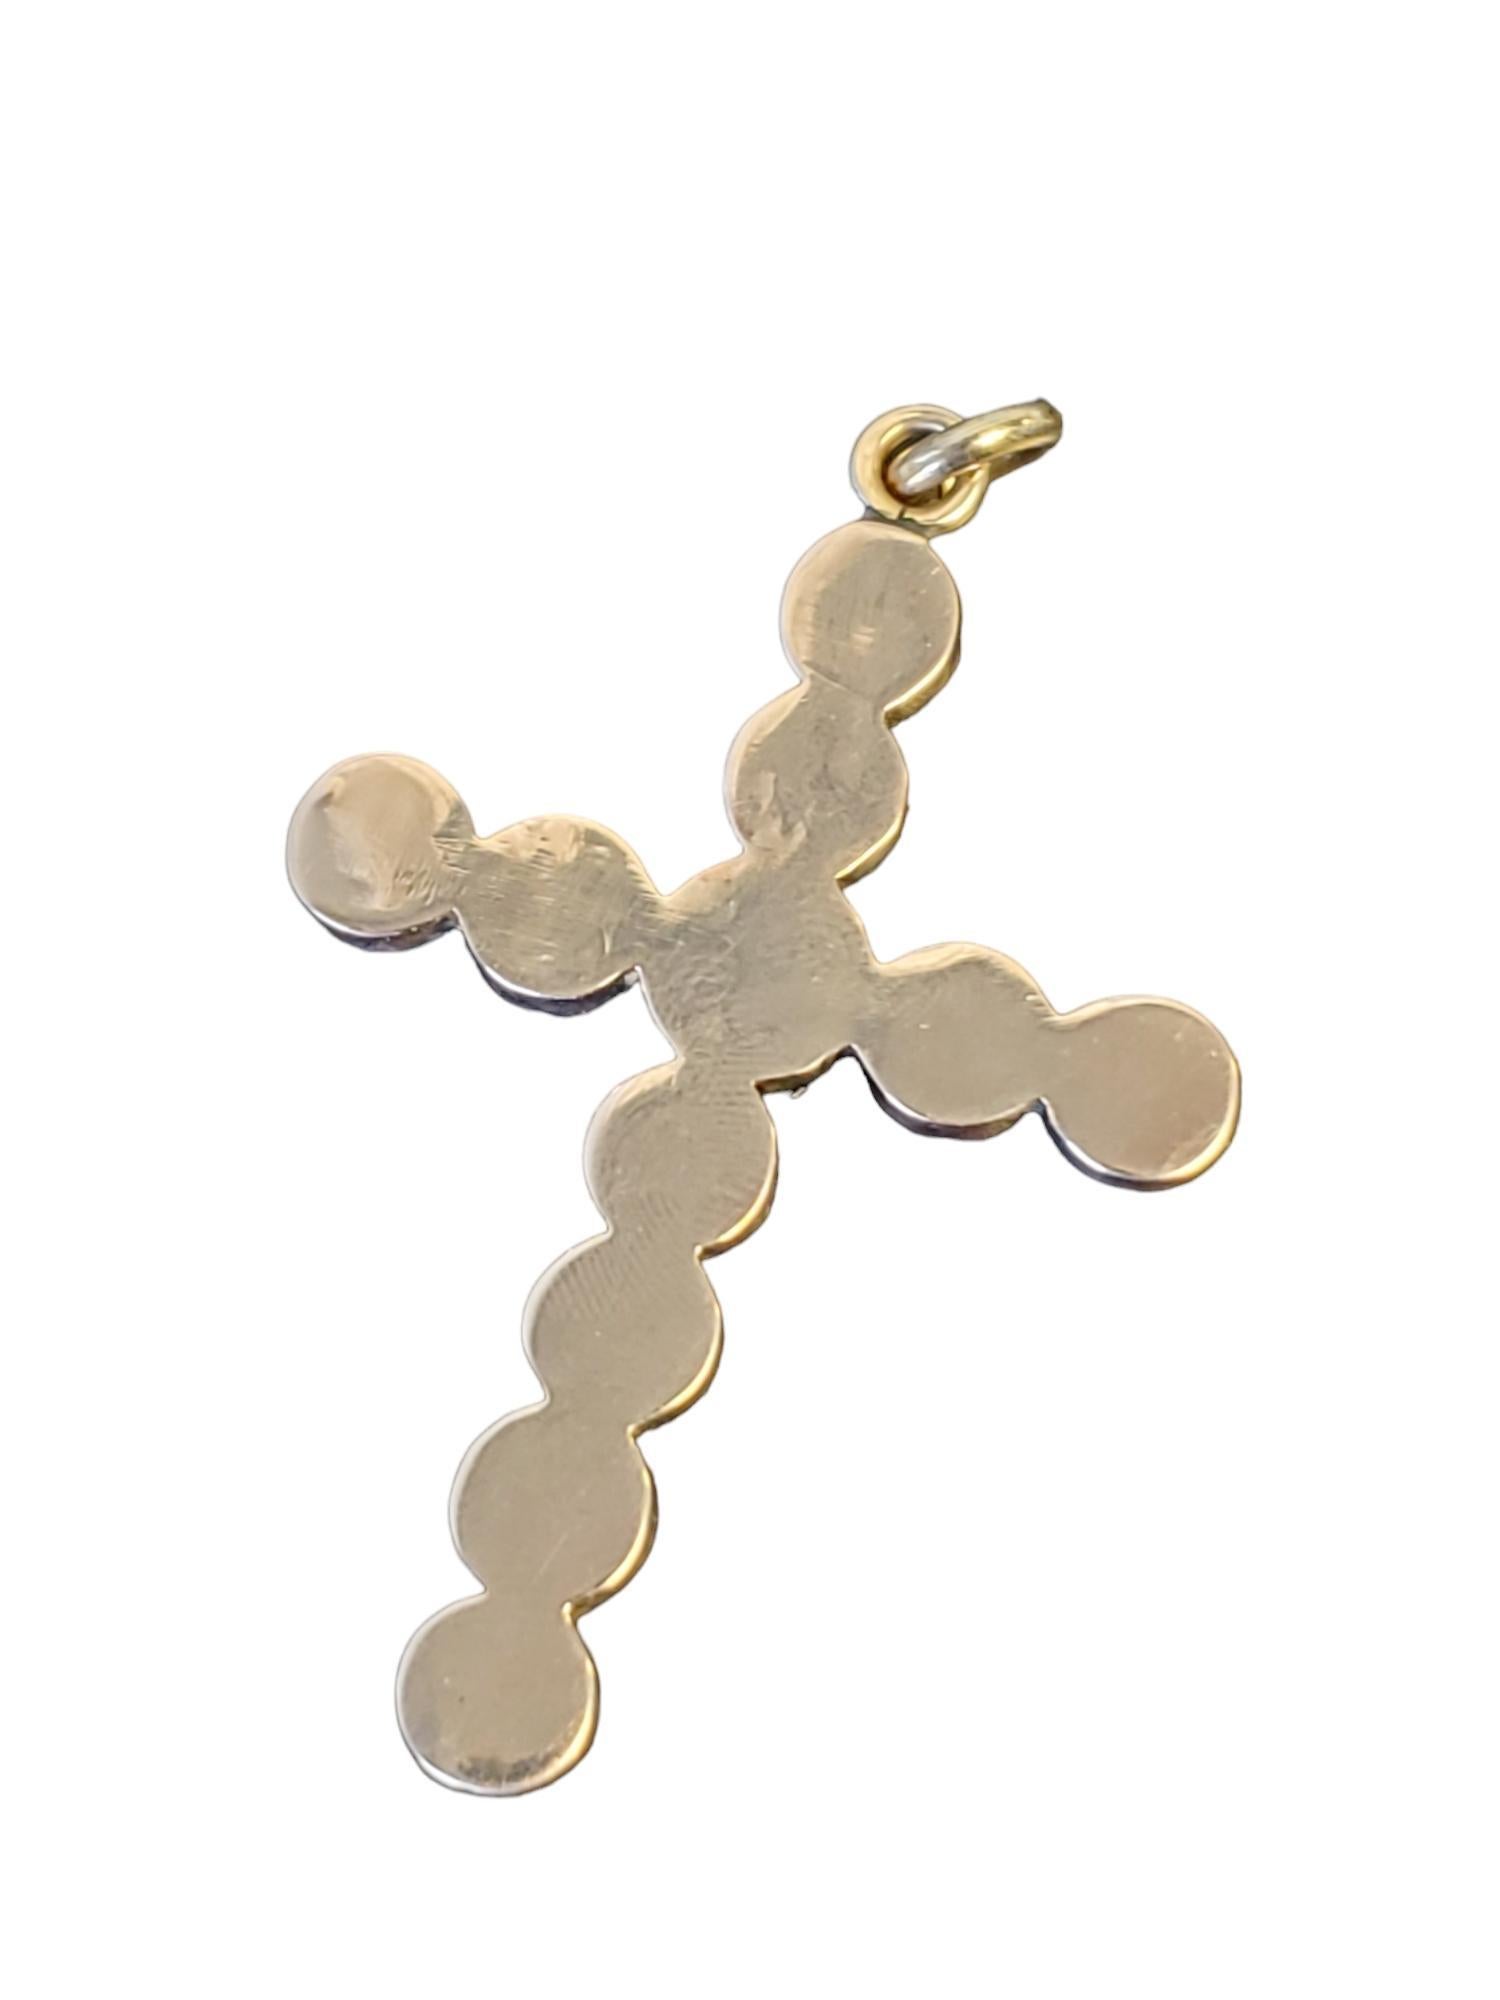 Vintage Cross Blue Opal 9tcw Pendant Antique 10k Yellow Gold Pendant In Good Condition For Sale In Overland Park, KS